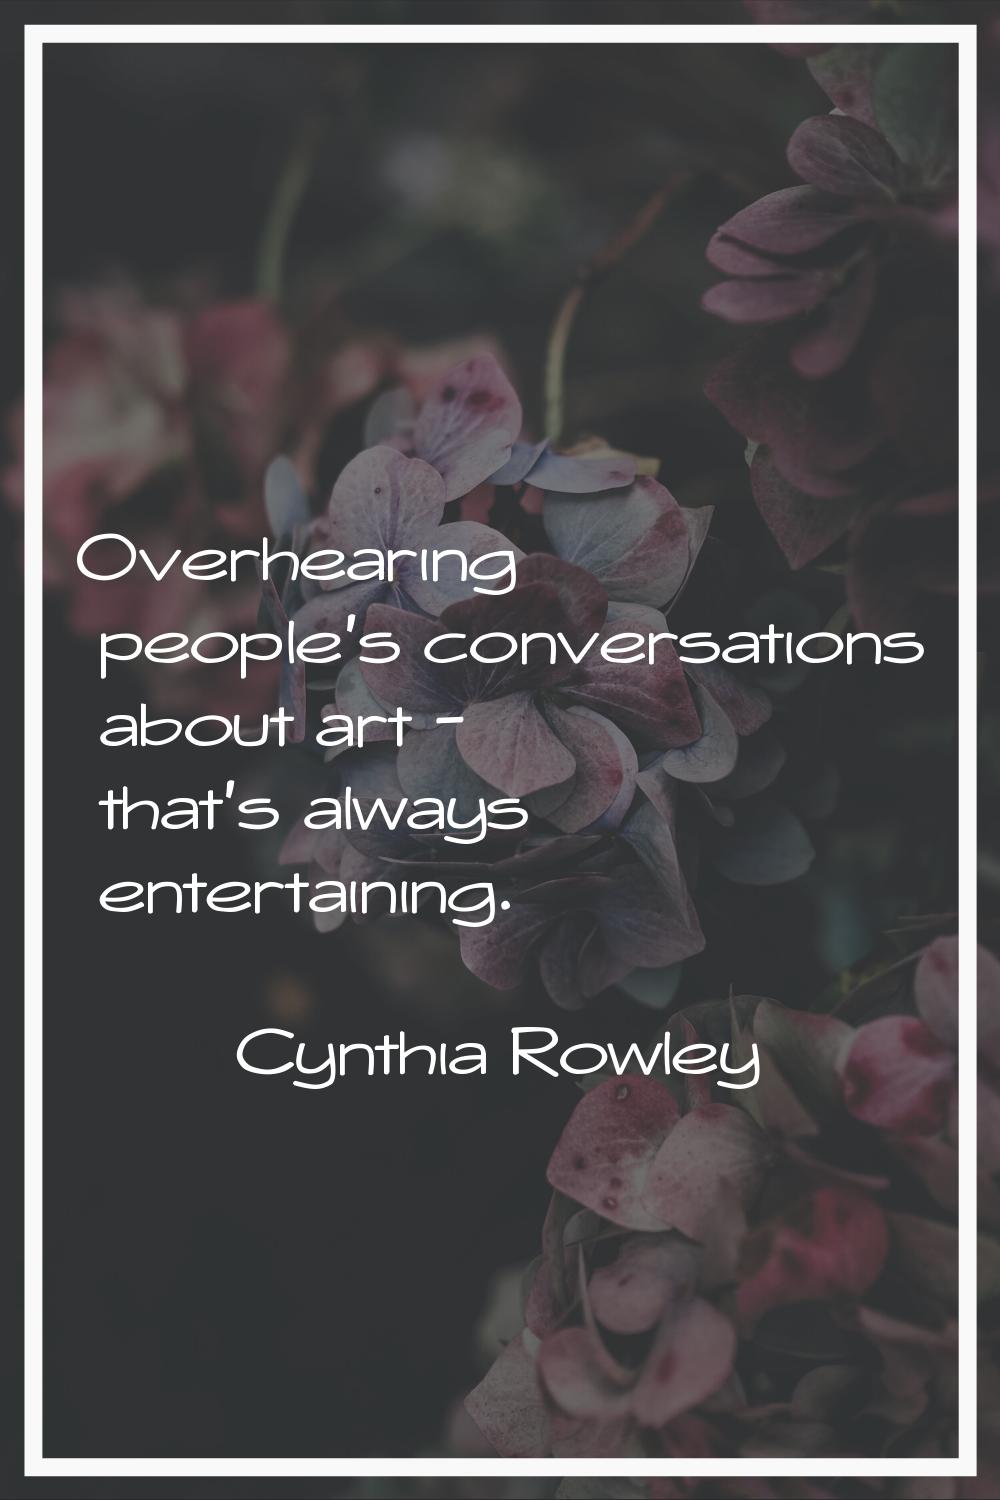 Overhearing people's conversations about art - that's always entertaining.